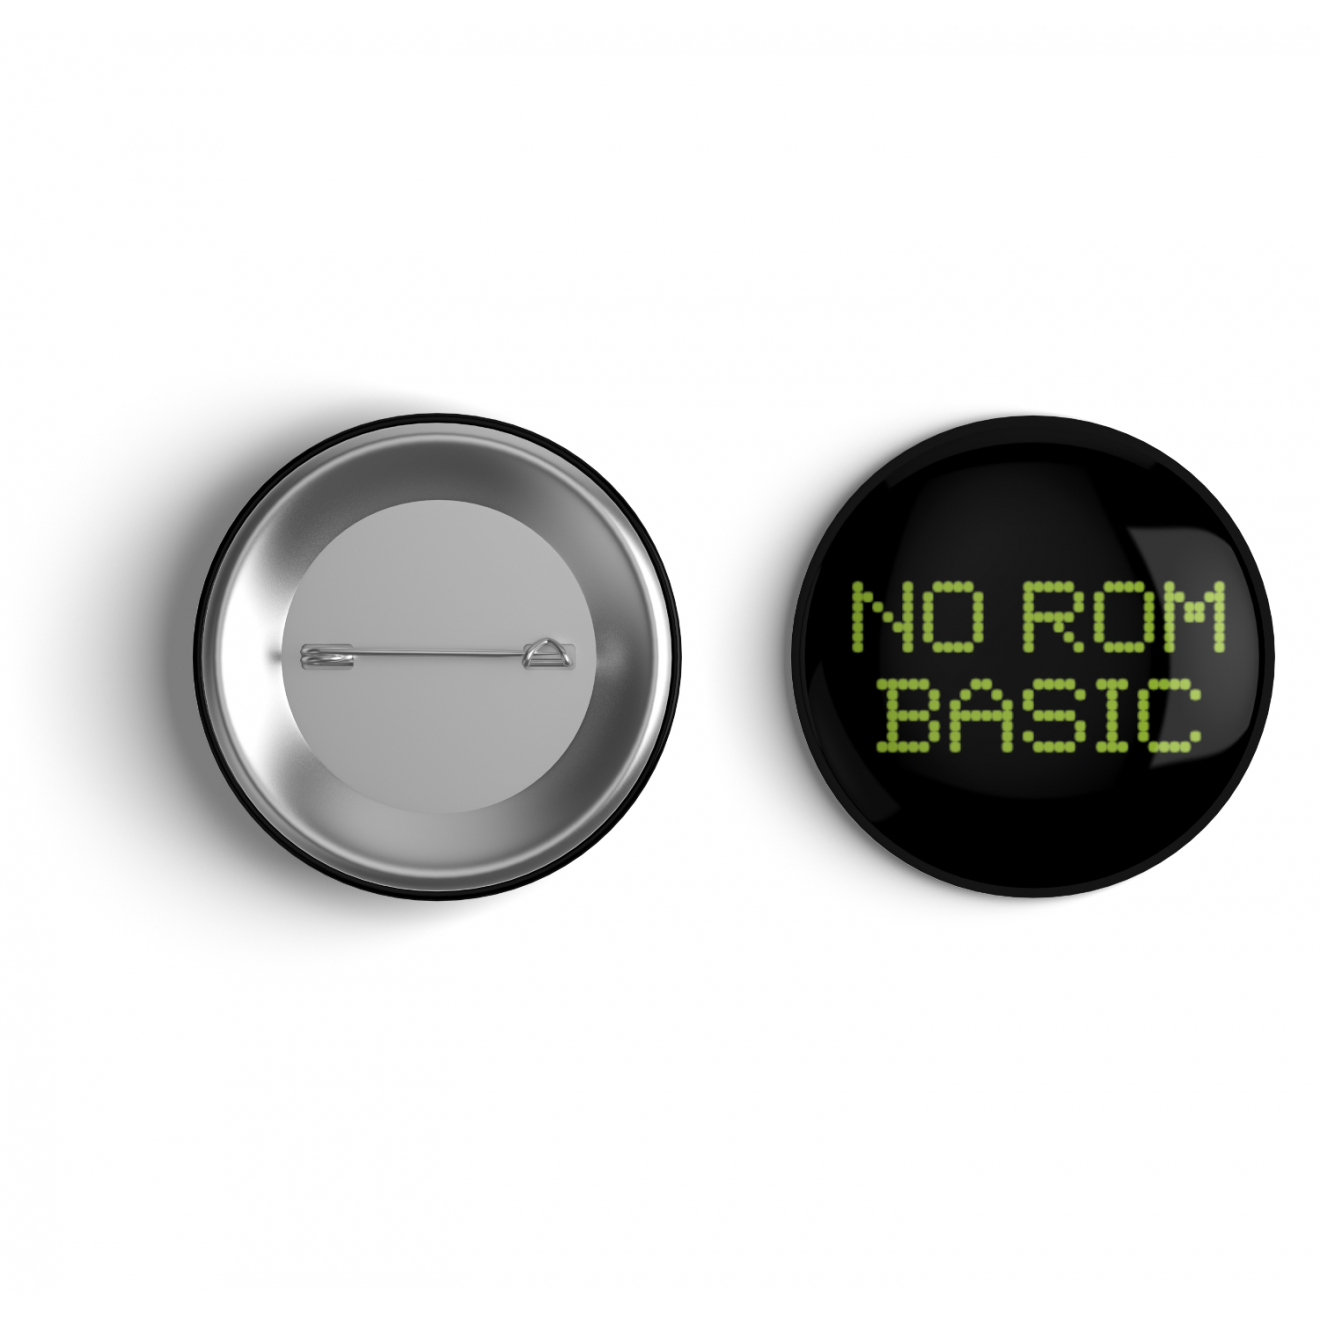 Button: NO ROM BASIC